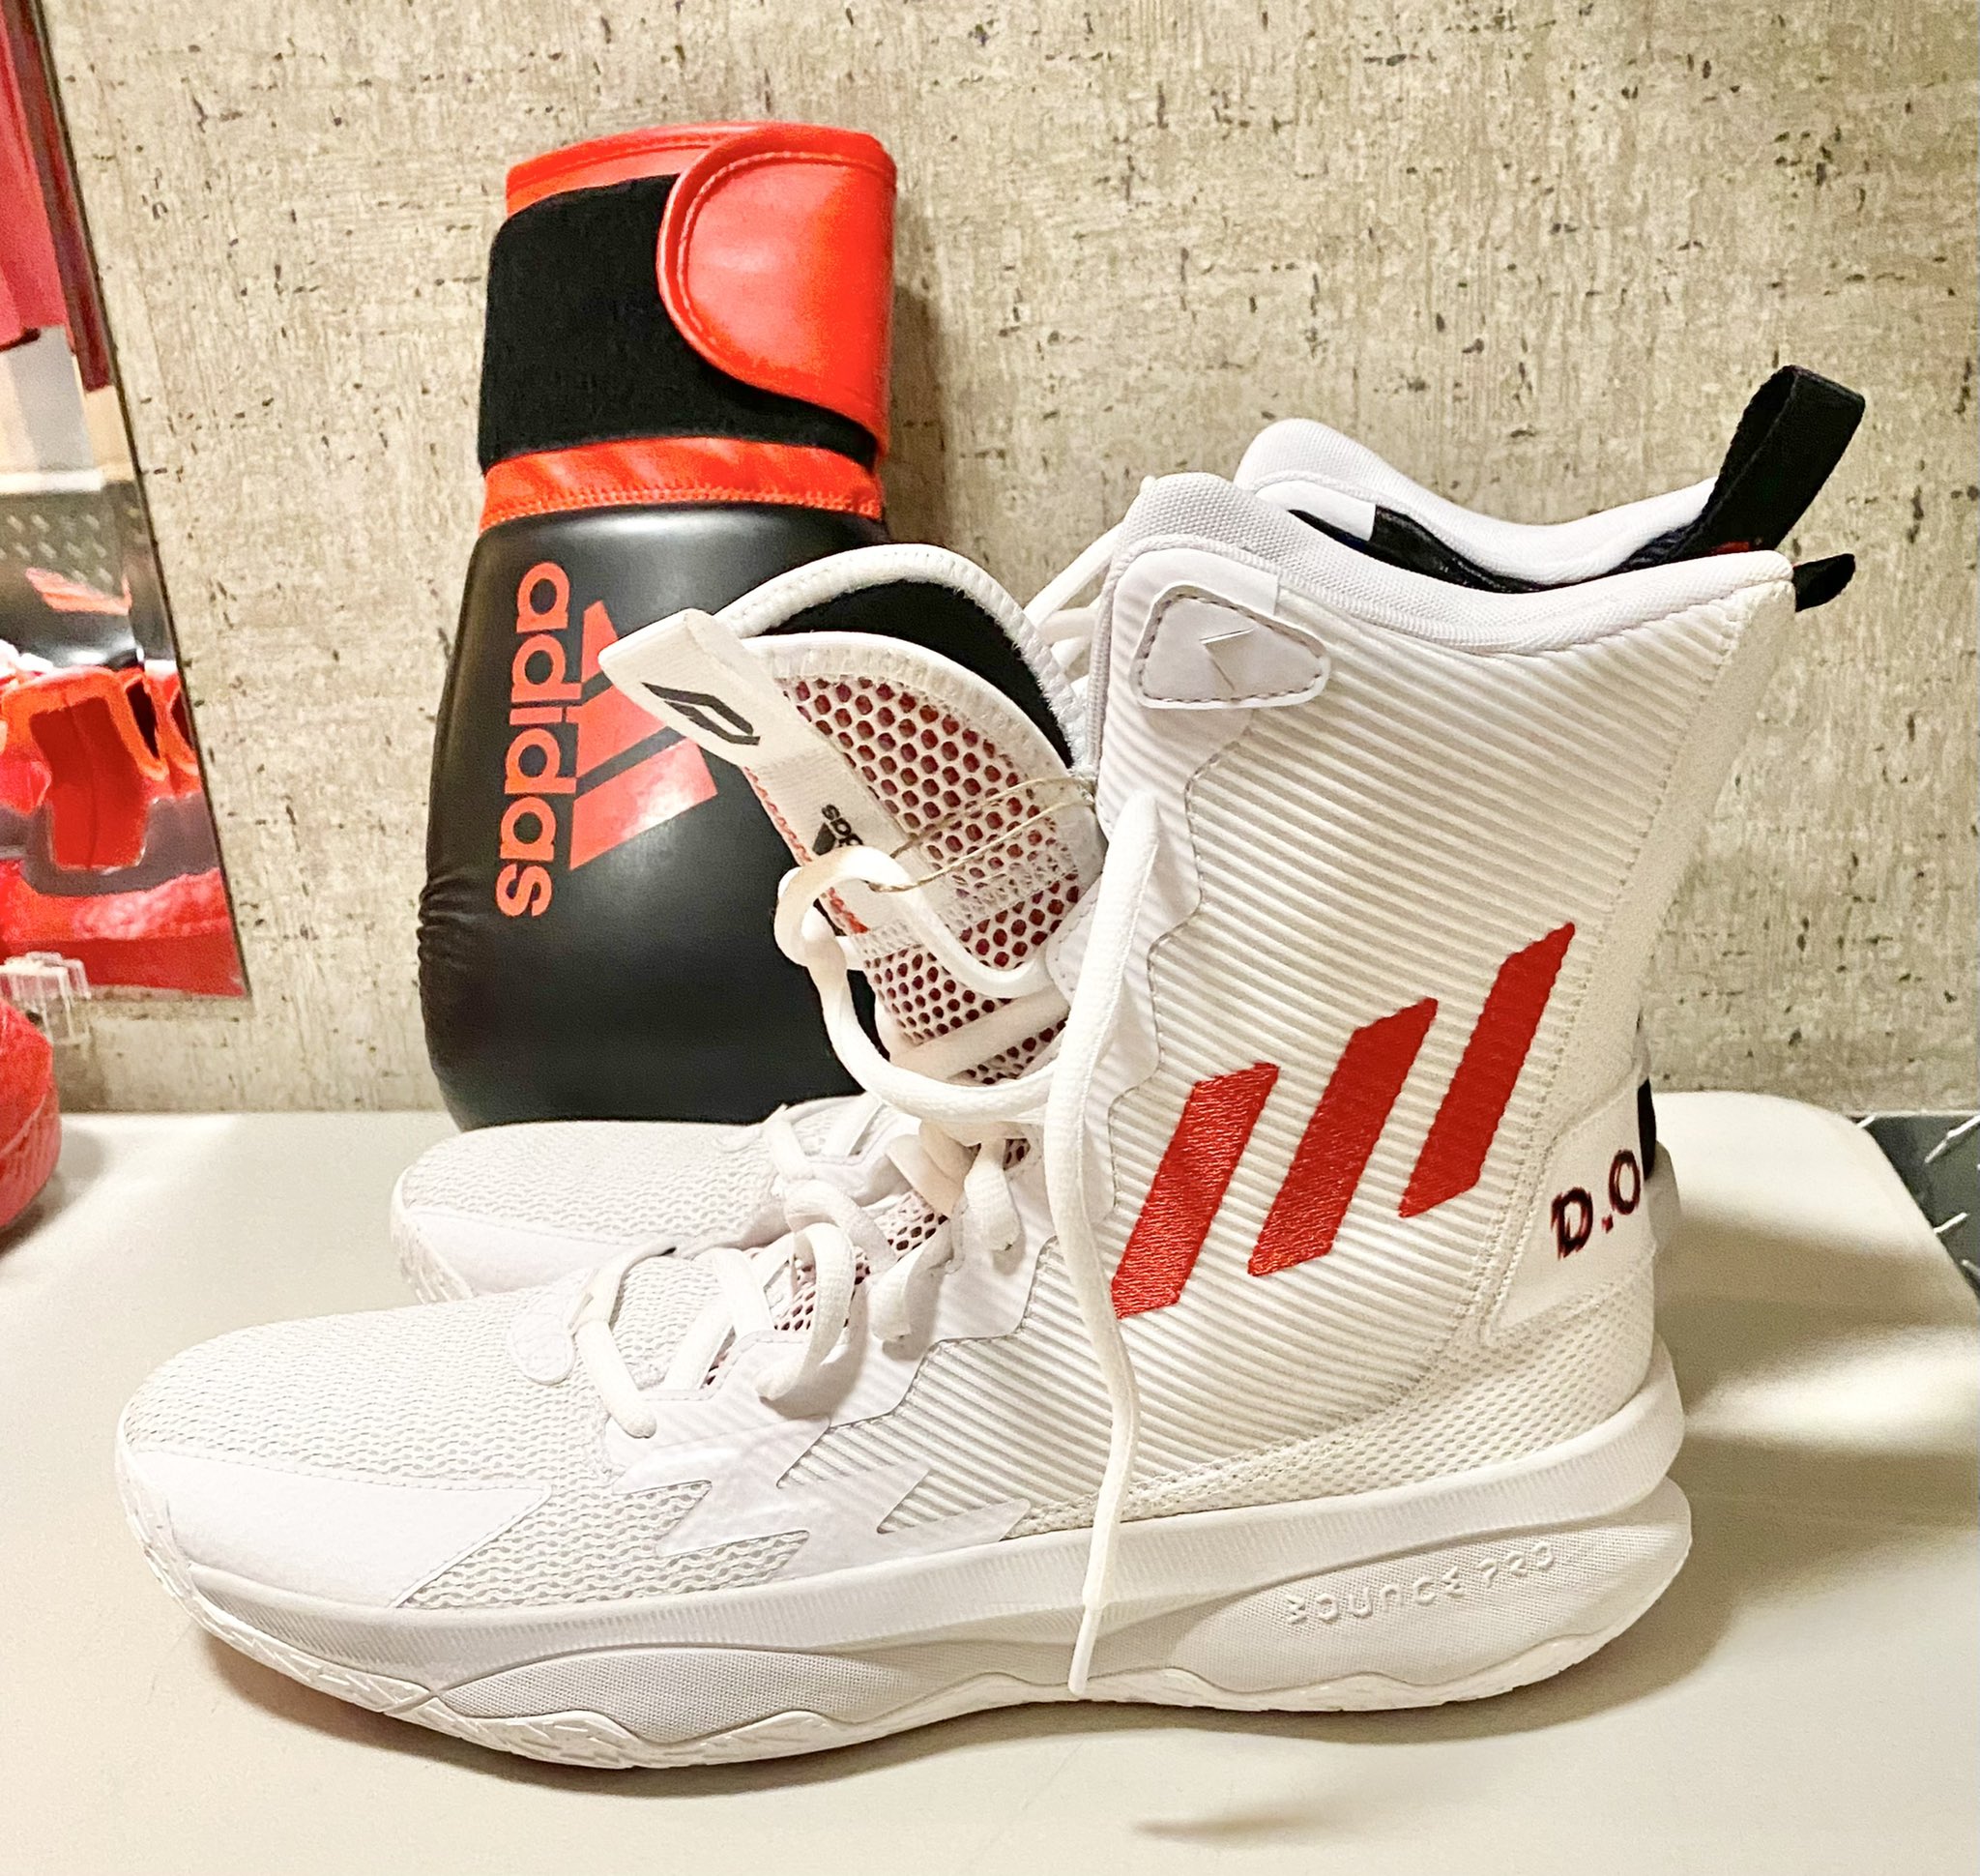 Nick DePaula on X: "Adidas made @Dame_Lillard a custom high-top Dame 8 Boxing shoe for this commercial shoot 👇🏼 https://t.co/8tMs7XAcH8" /